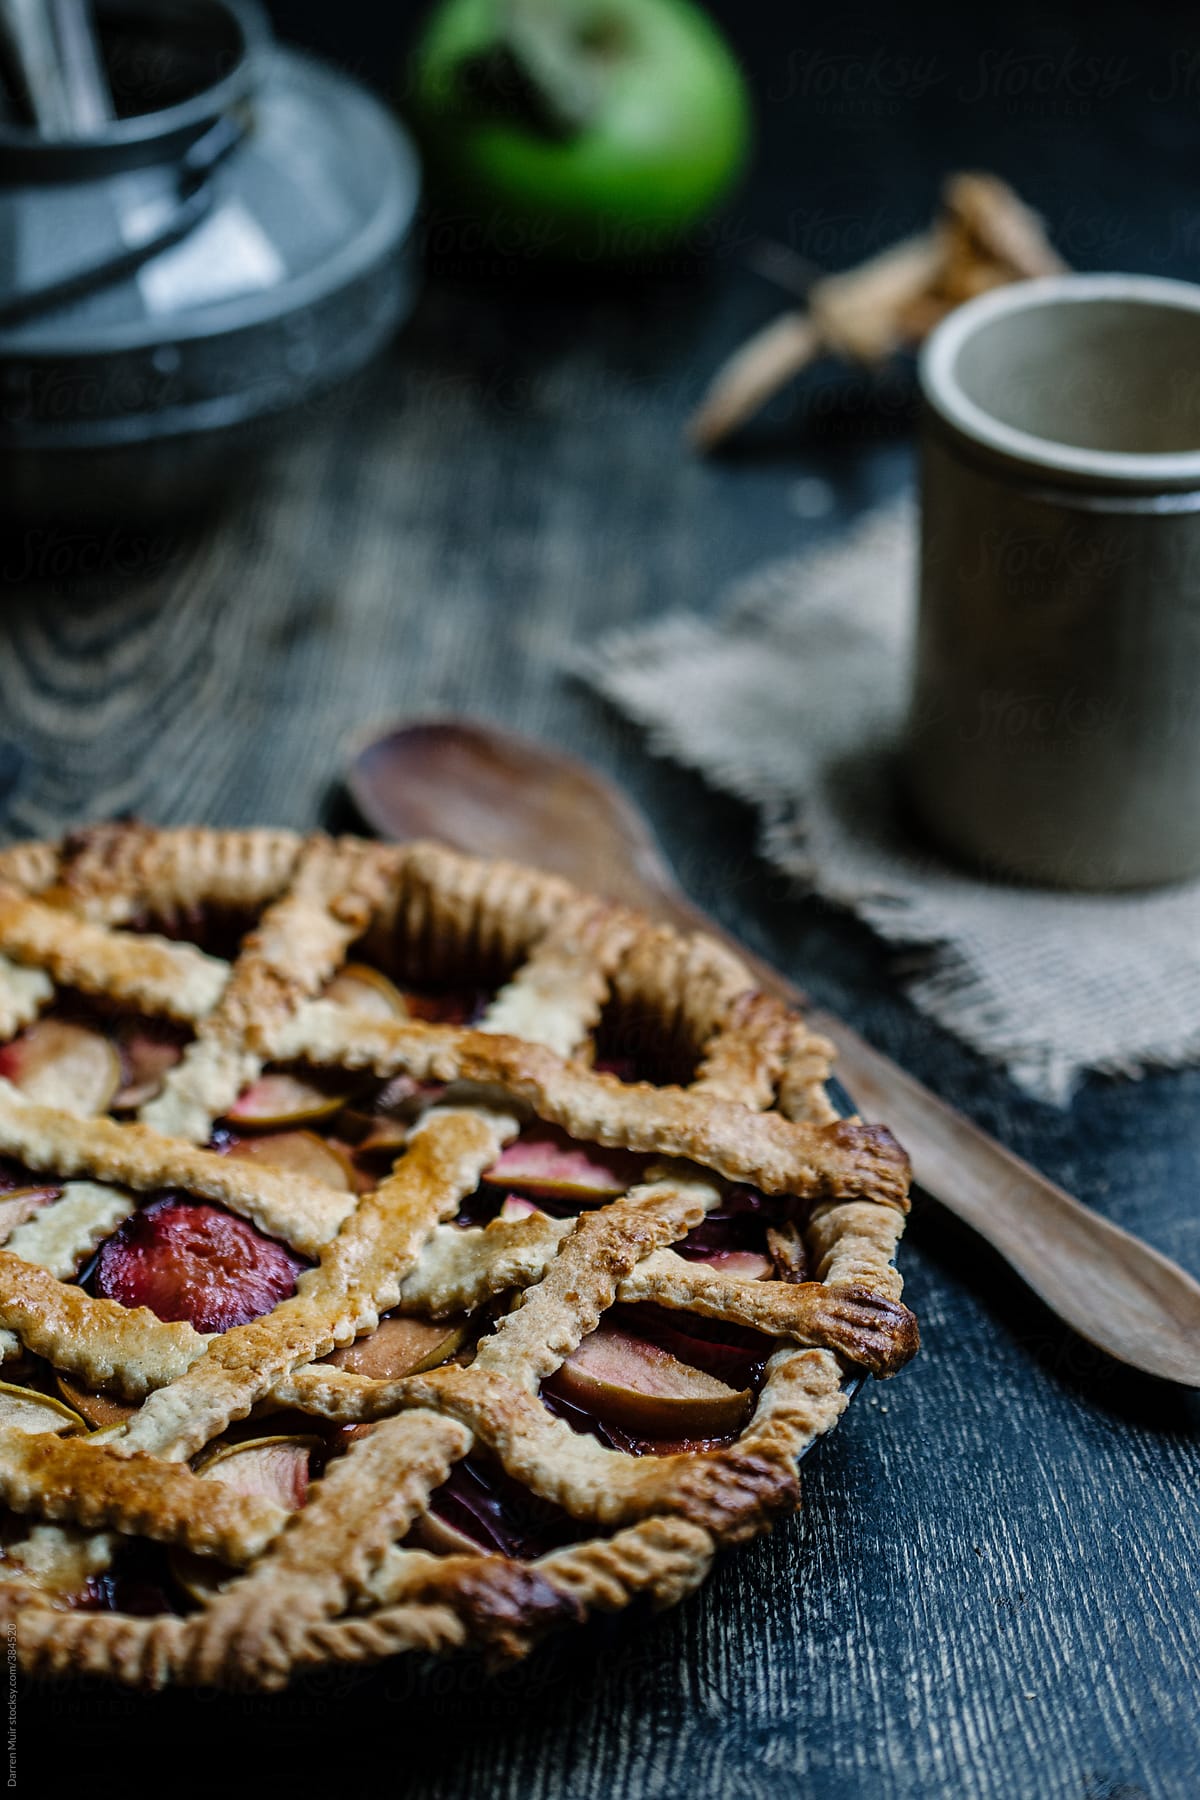 Homemade apple and plum pie on table.